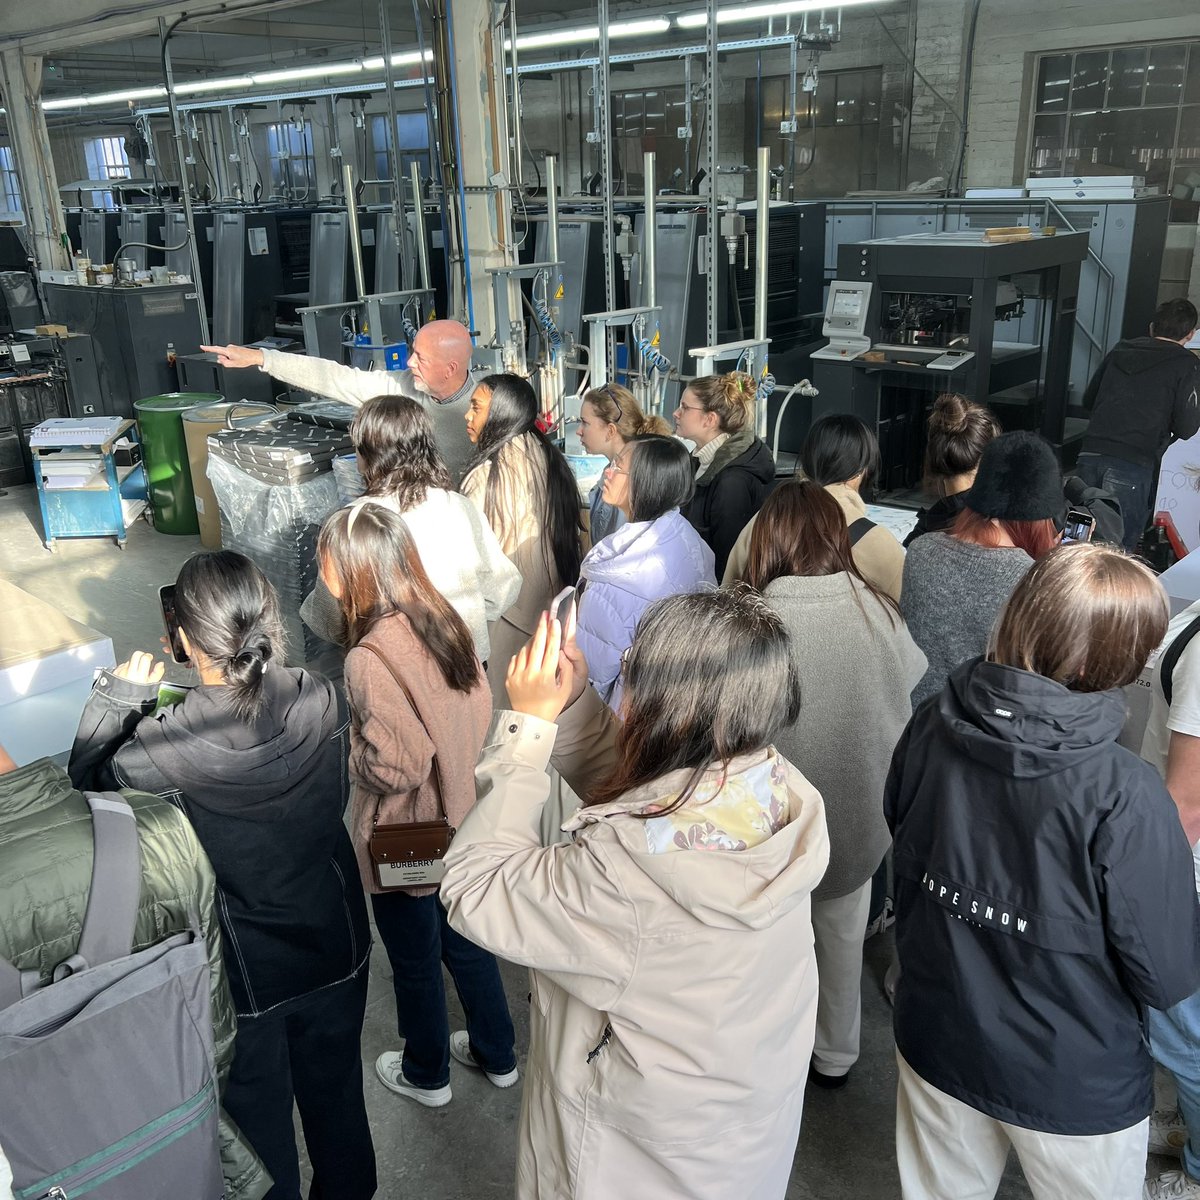 A pleasure to show university students around Impress Print Services today.

#education
#universitystudents
#factoryvisit
#creativedesign 
#sustainabledesign
#sustainablebusiness